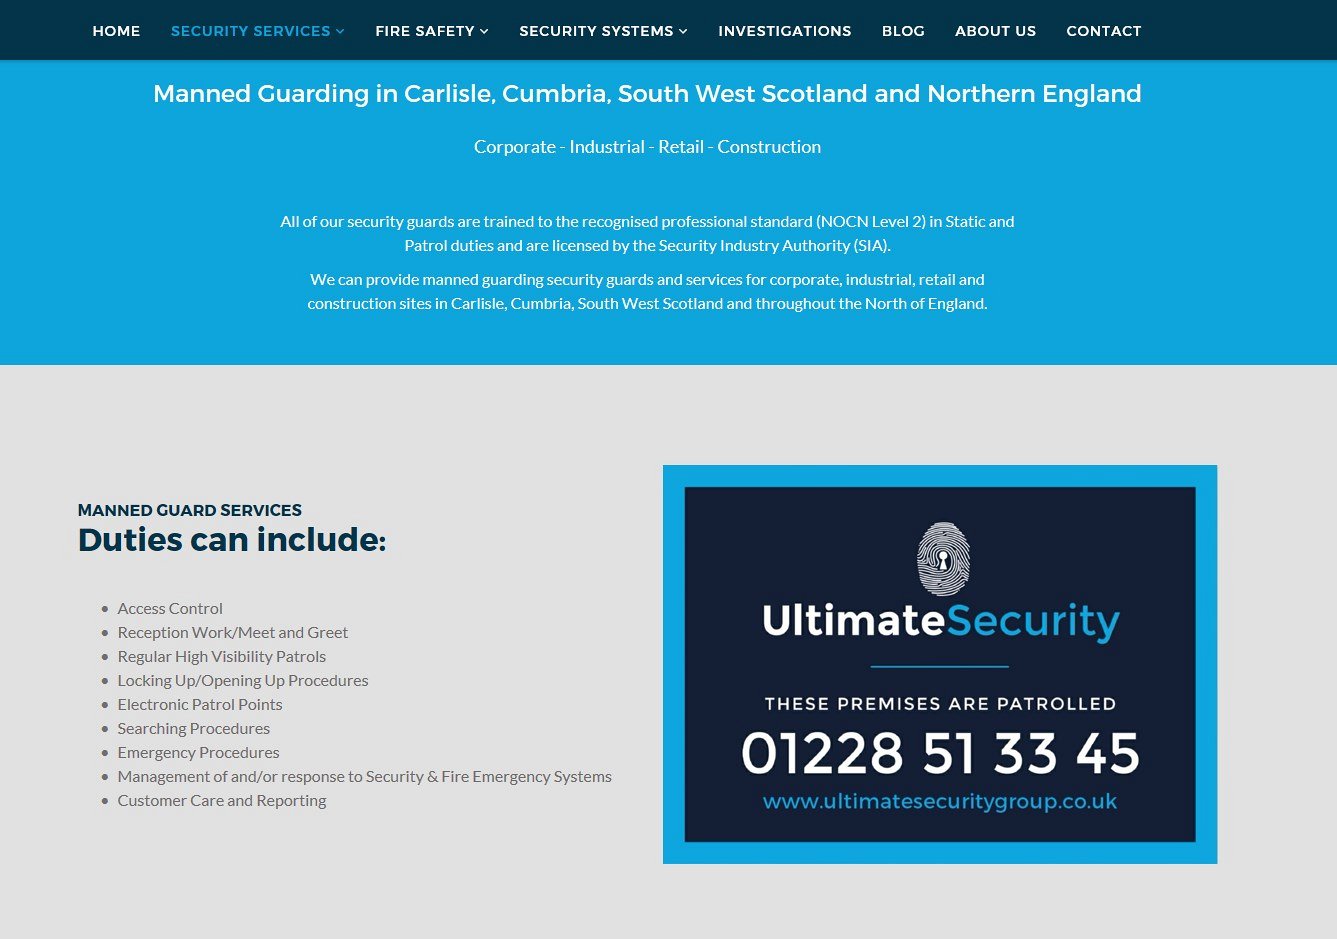 Ultimate Security Group